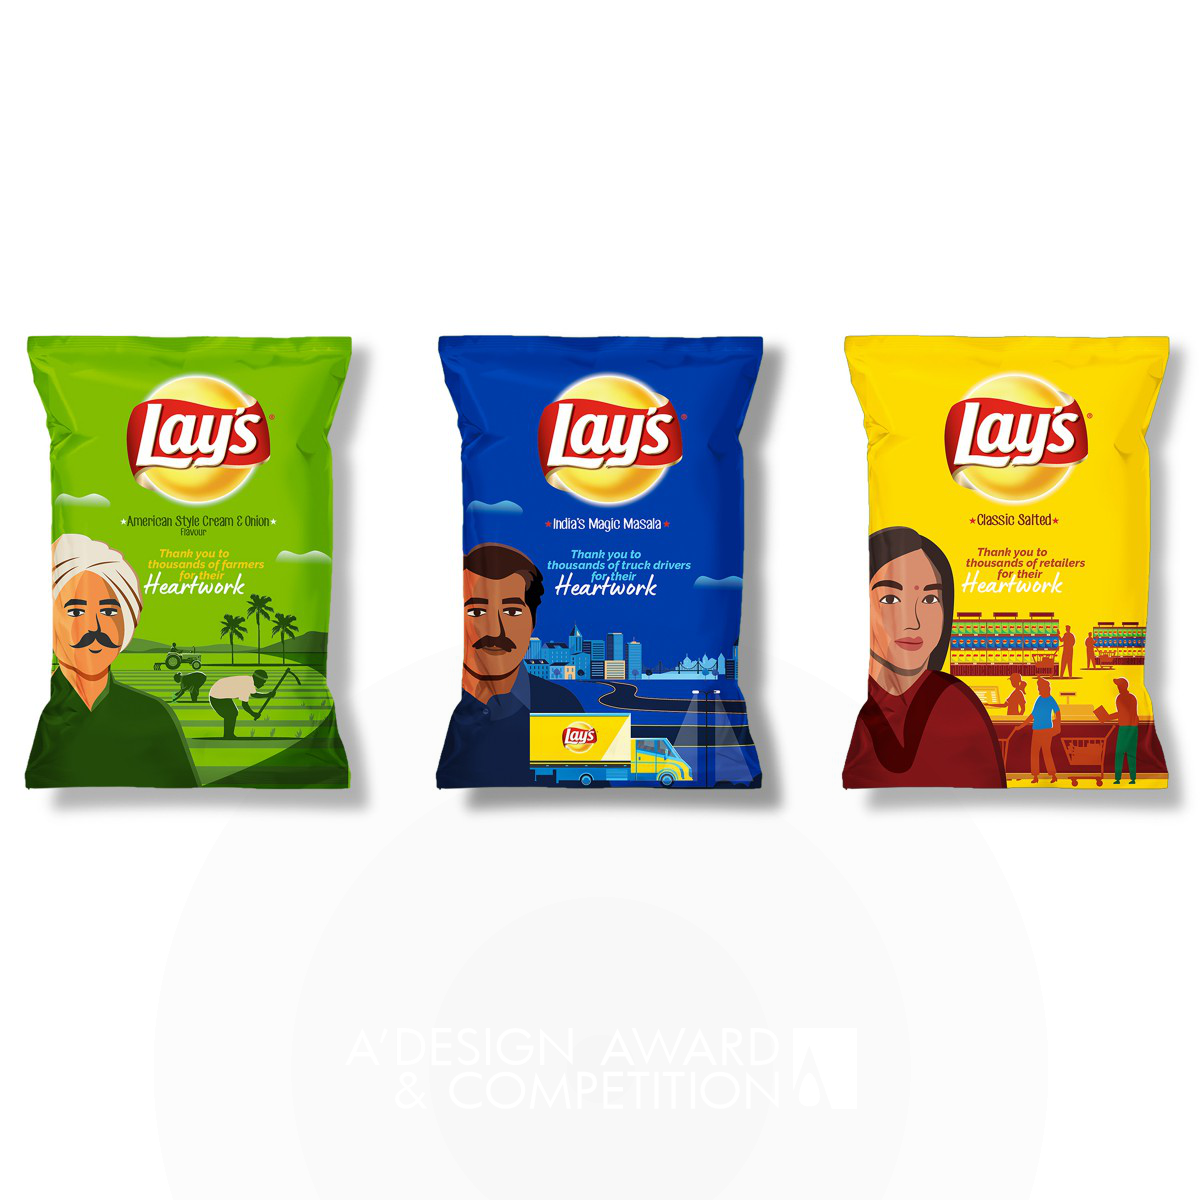 Lays Heartwork Campaign